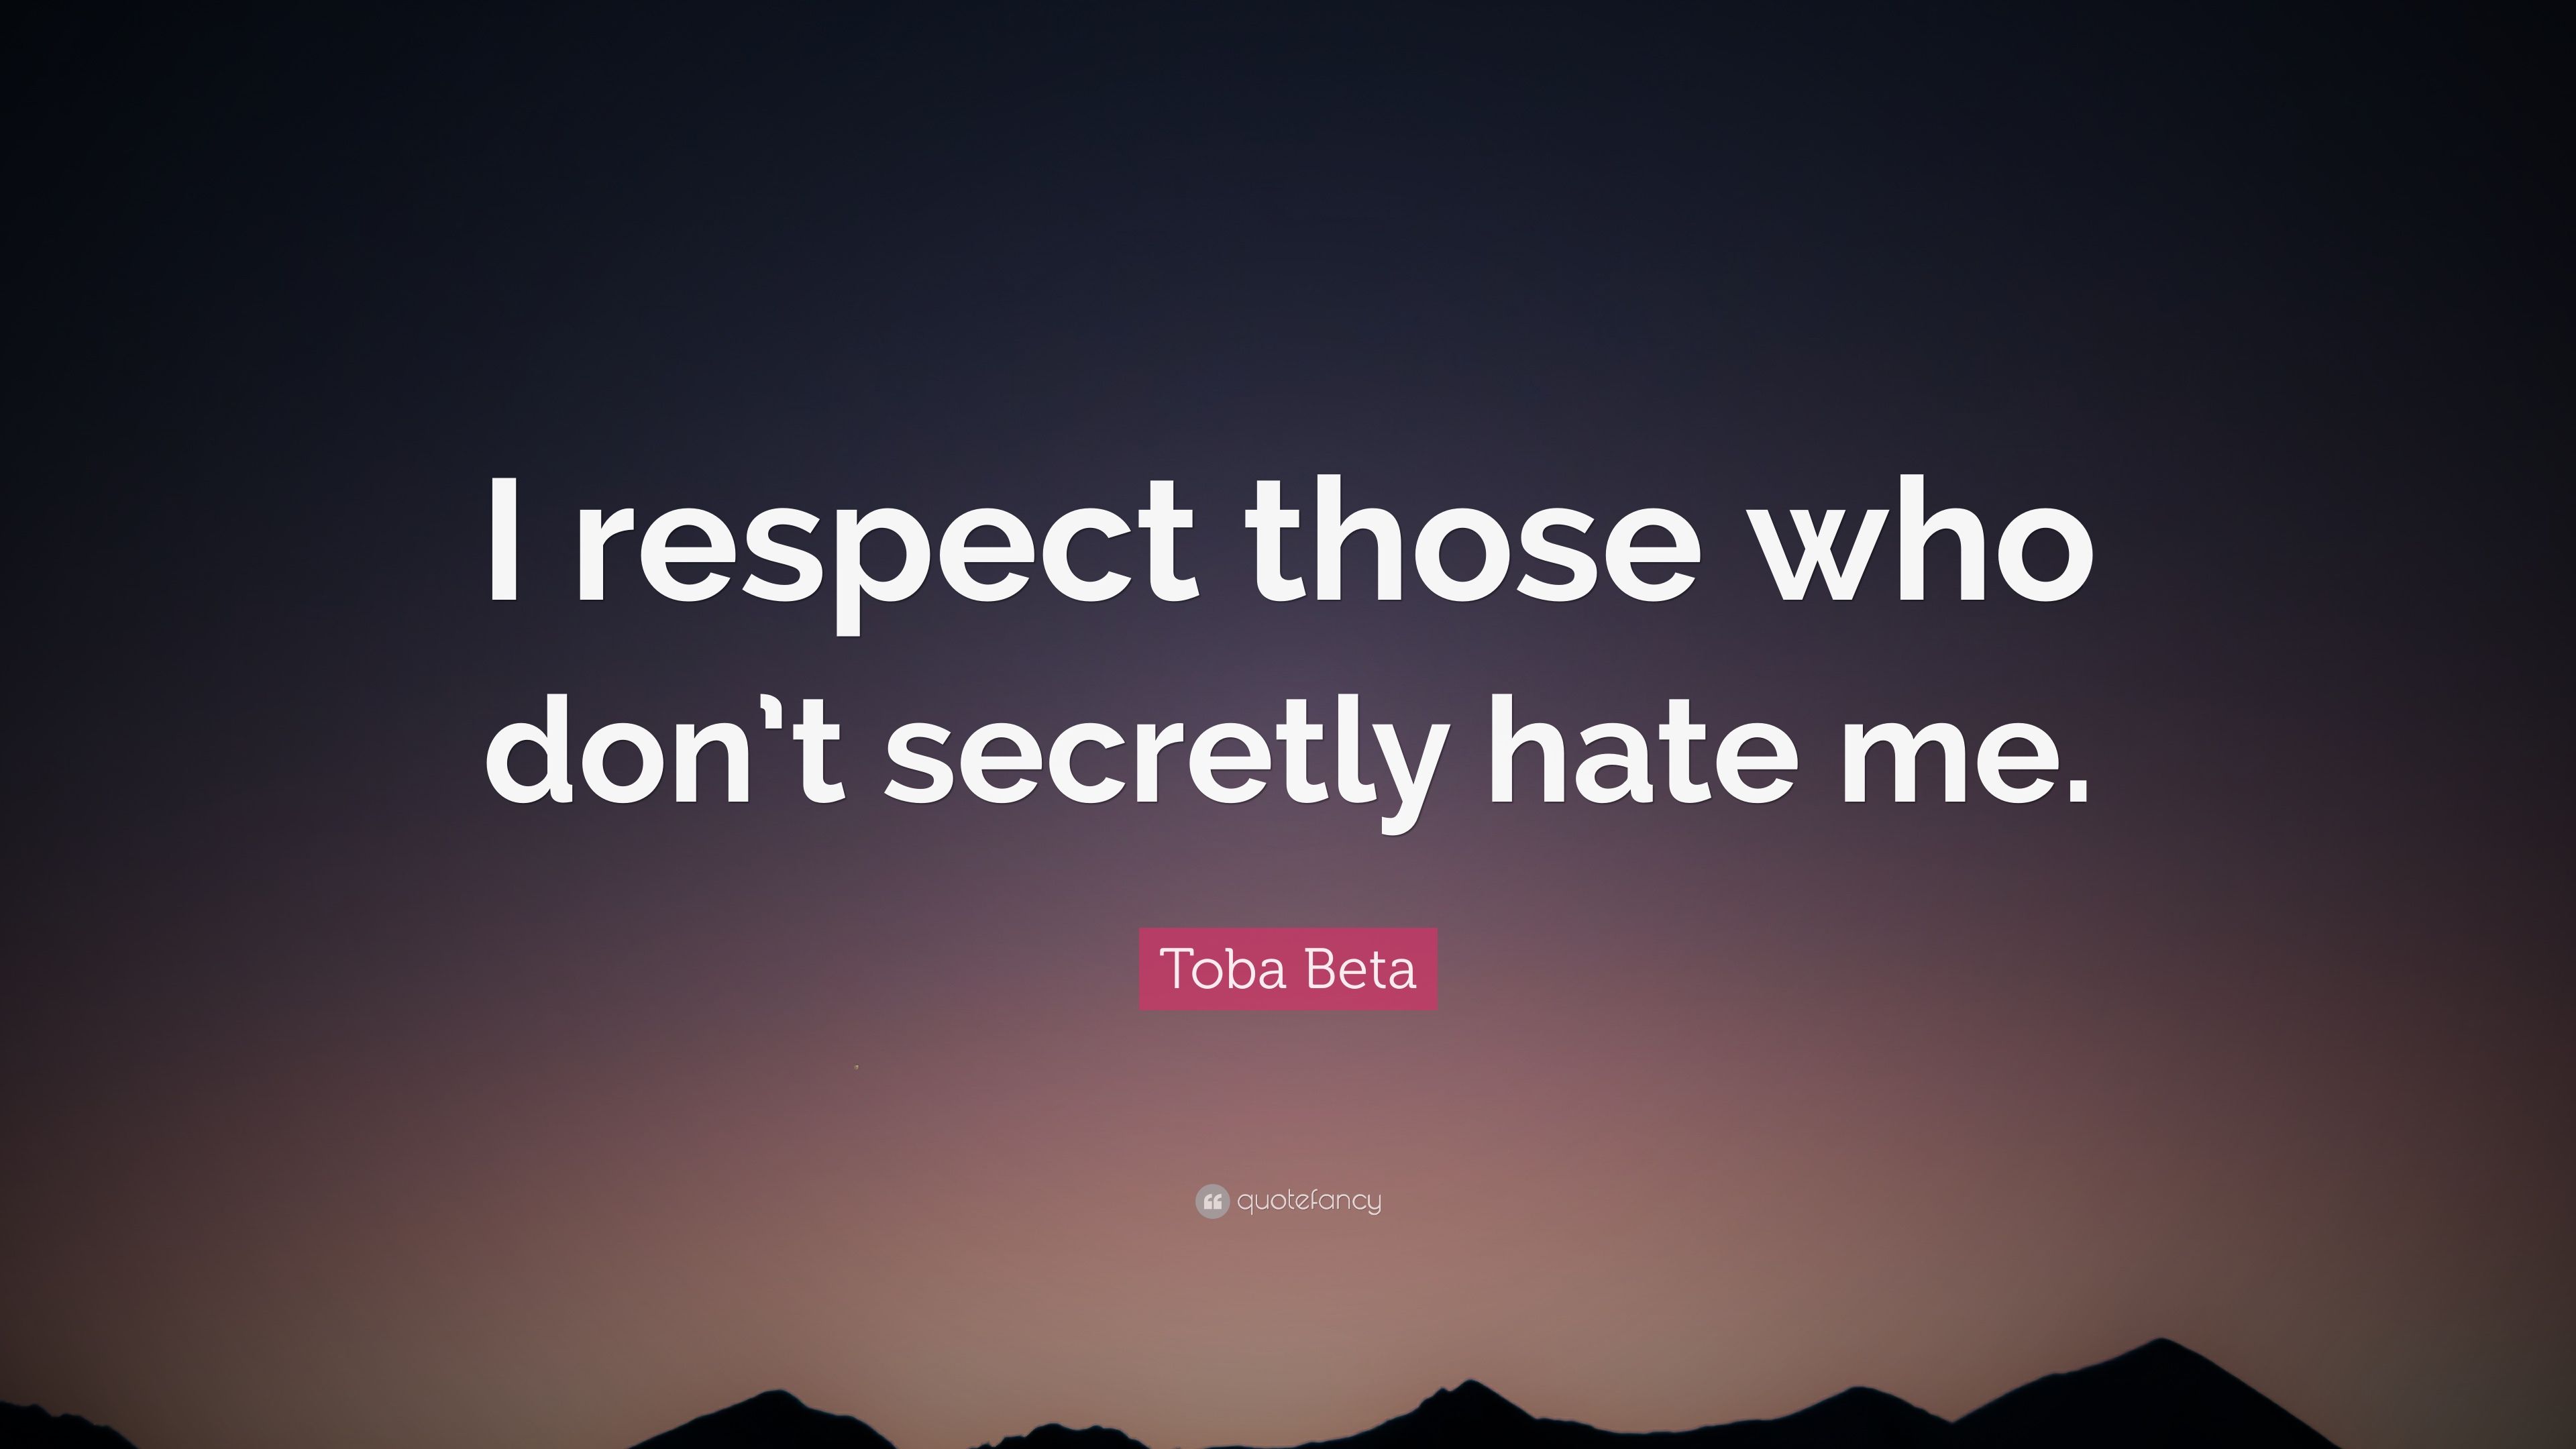 Toba Beta Quote: “I respect those who don't secretly hate me.” 10